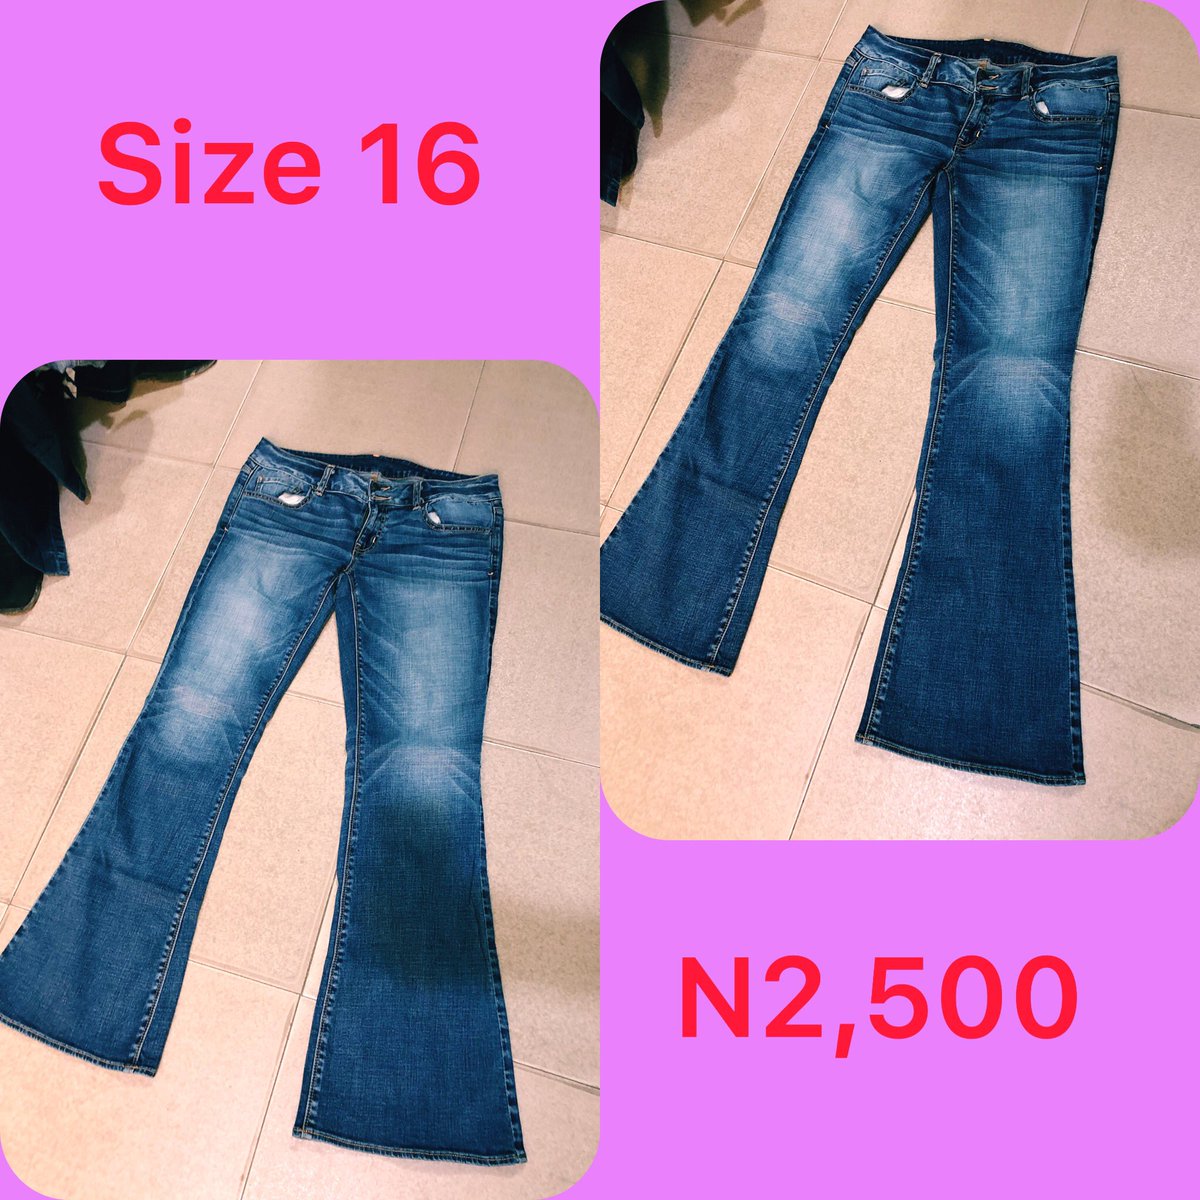 Slide 1: palazzo jeans      Size 14, N2,500Slide 2: palazzo jeans       Size 16, Price: N2,500Slide 3: palazzo jeans       Size 16, Price: N2,500Slide 4: palazzo jeans       Size 12, Price N2,500